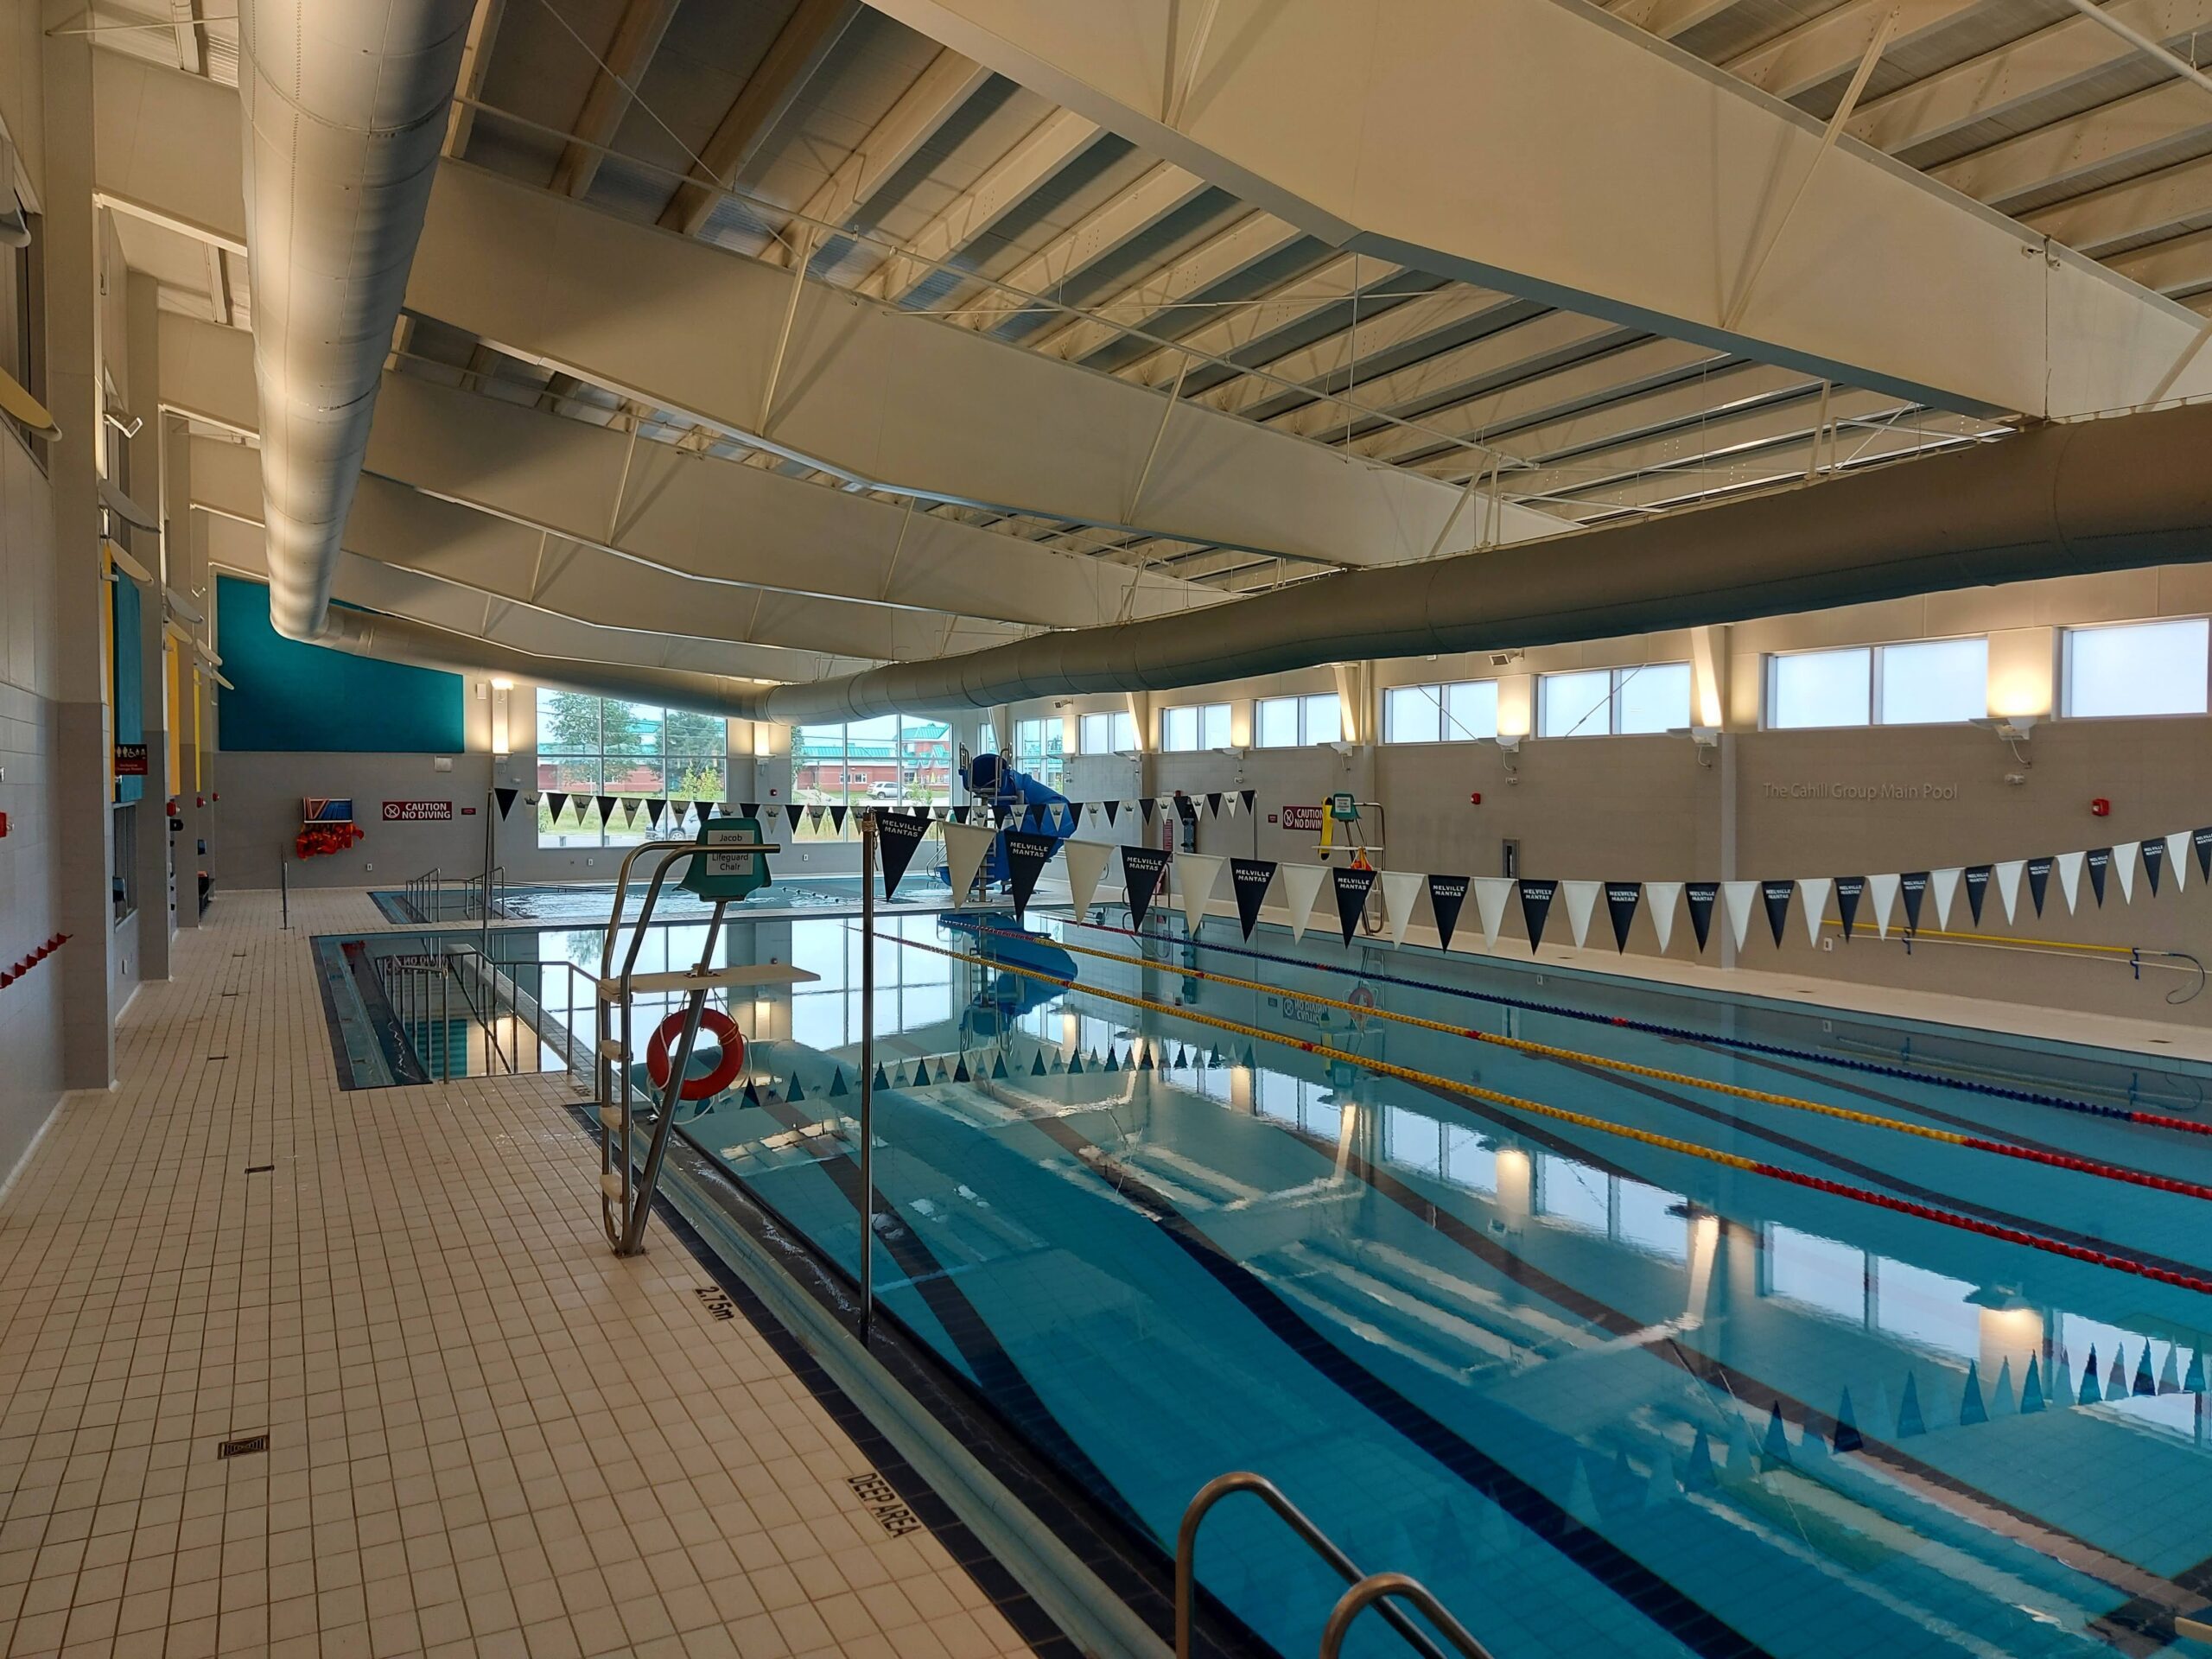 a wide-angle view of a swimming pool